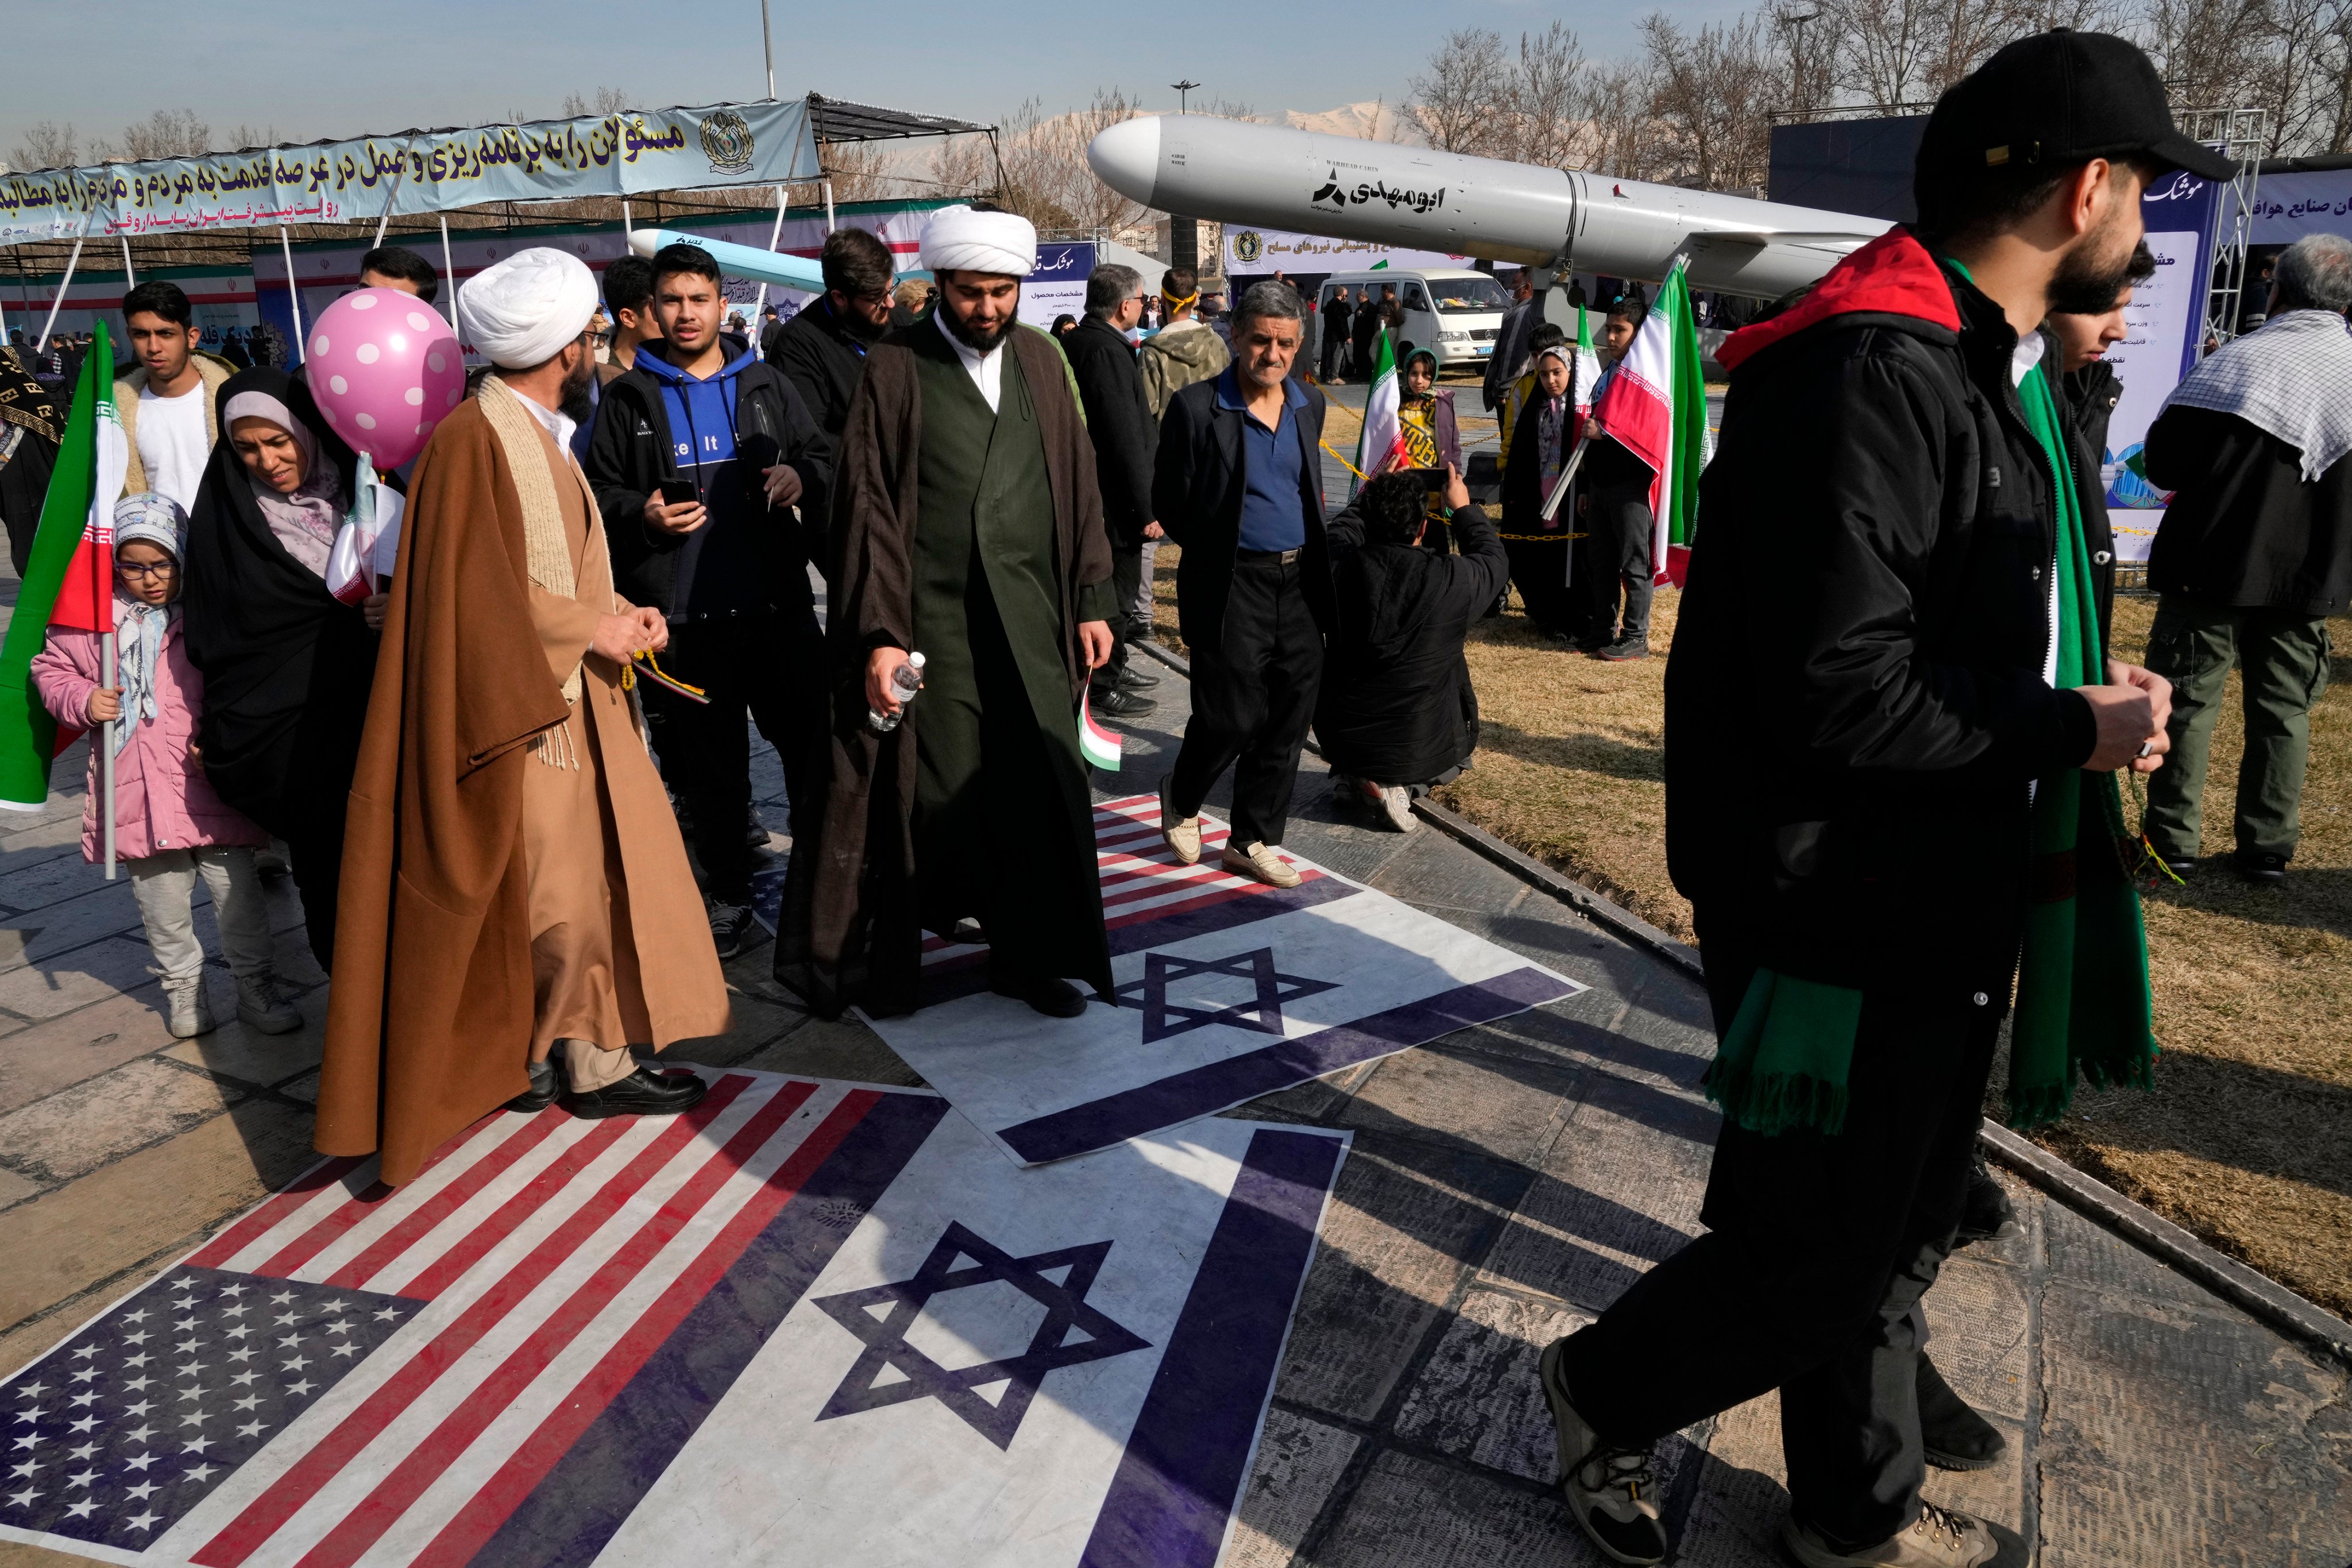 Demonstrators in Tehran walk on representations of the Israeli and US flags on Sunday during Iran’s annual rally commemorating the 1979 Islamic Revolution. Photo: AP